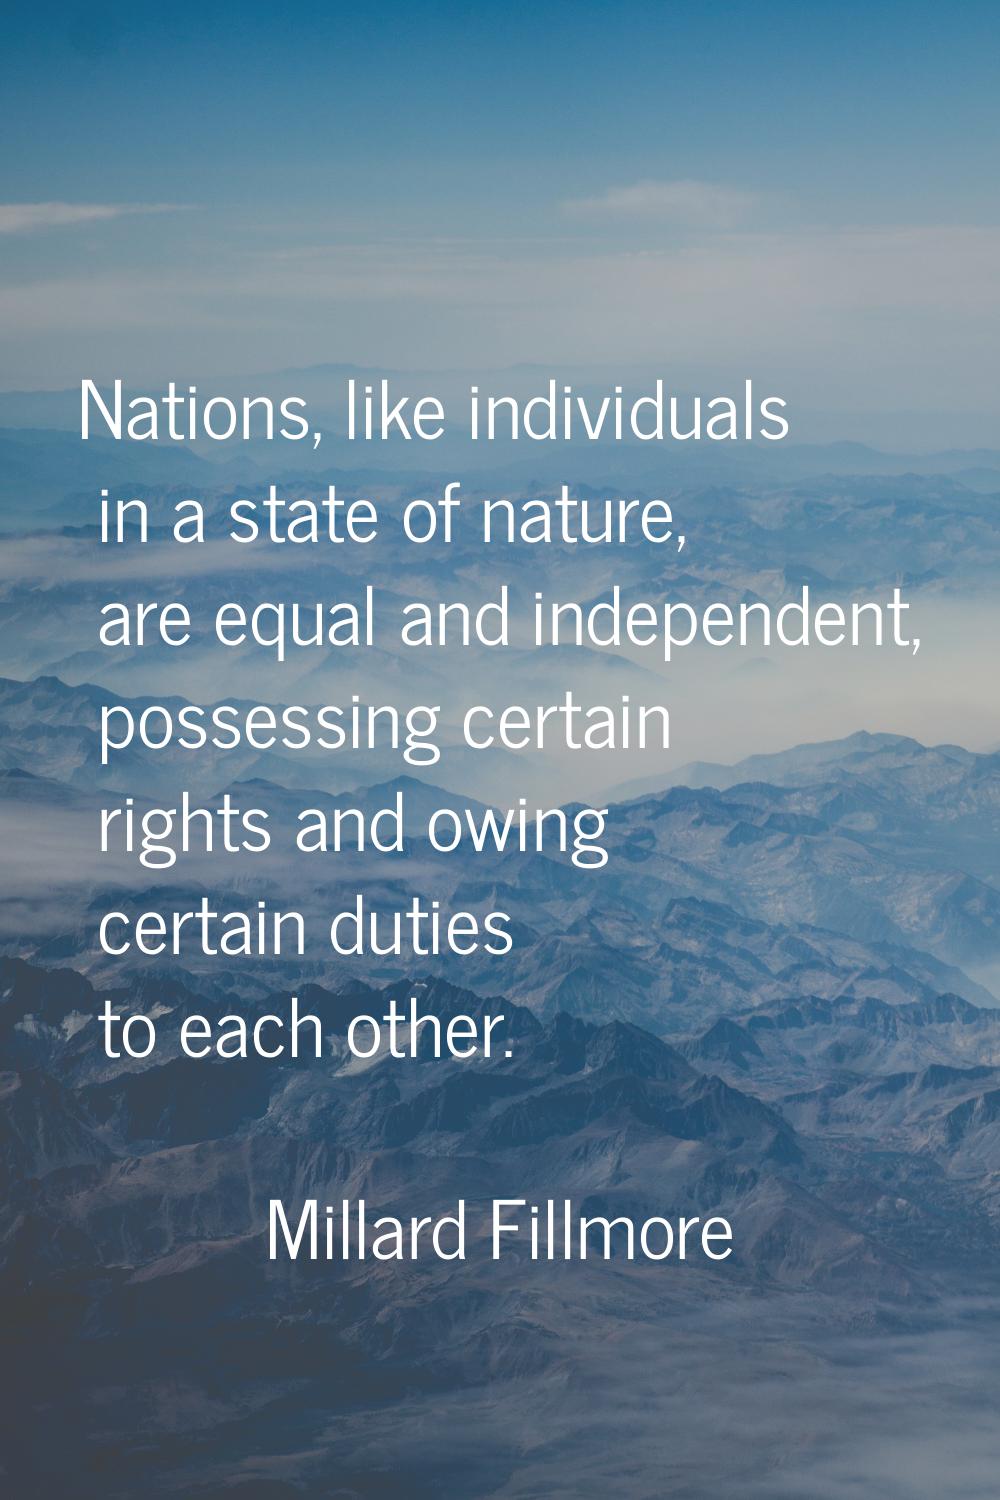 Nations, like individuals in a state of nature, are equal and independent, possessing certain right